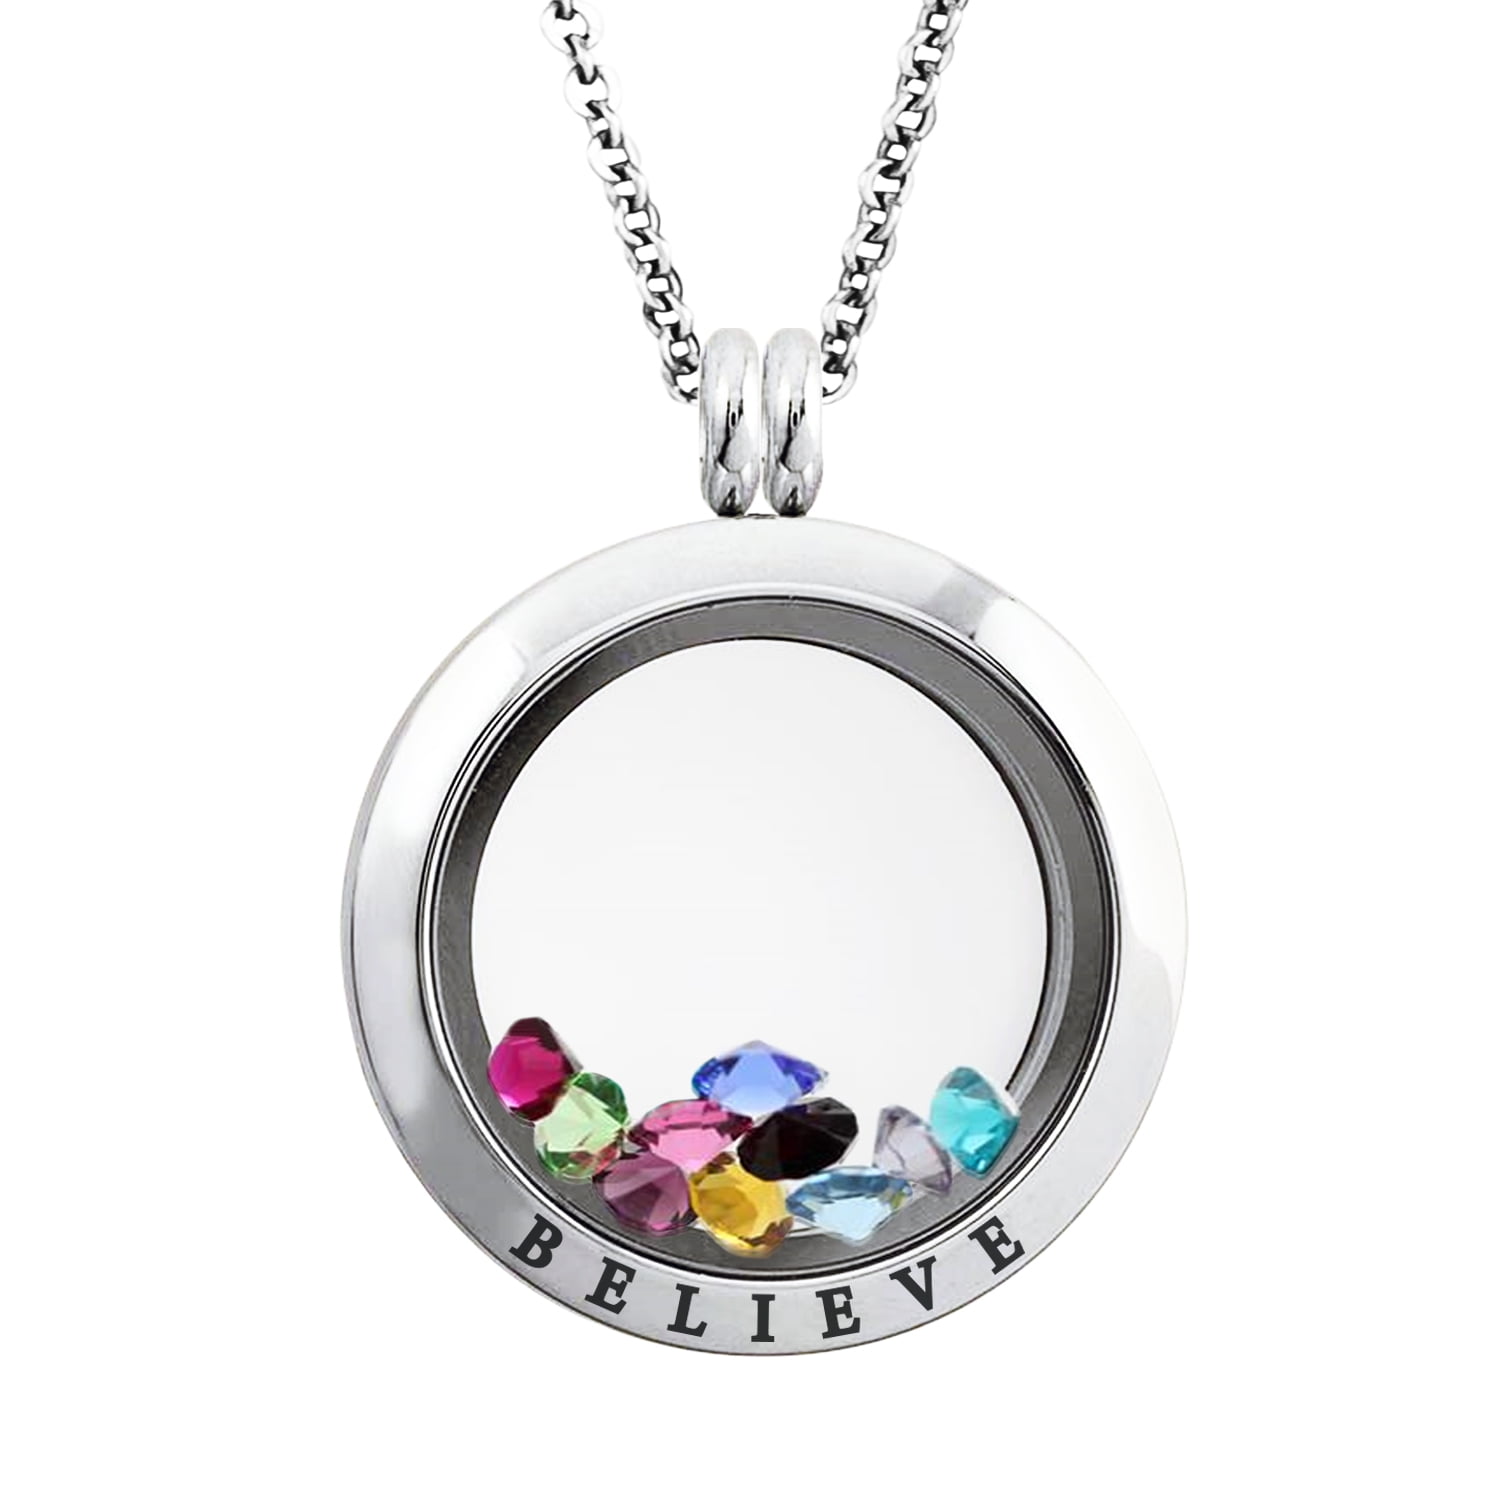 25 MM Stainless Steel Believe Engraved Floating Glass Charm Locket ...